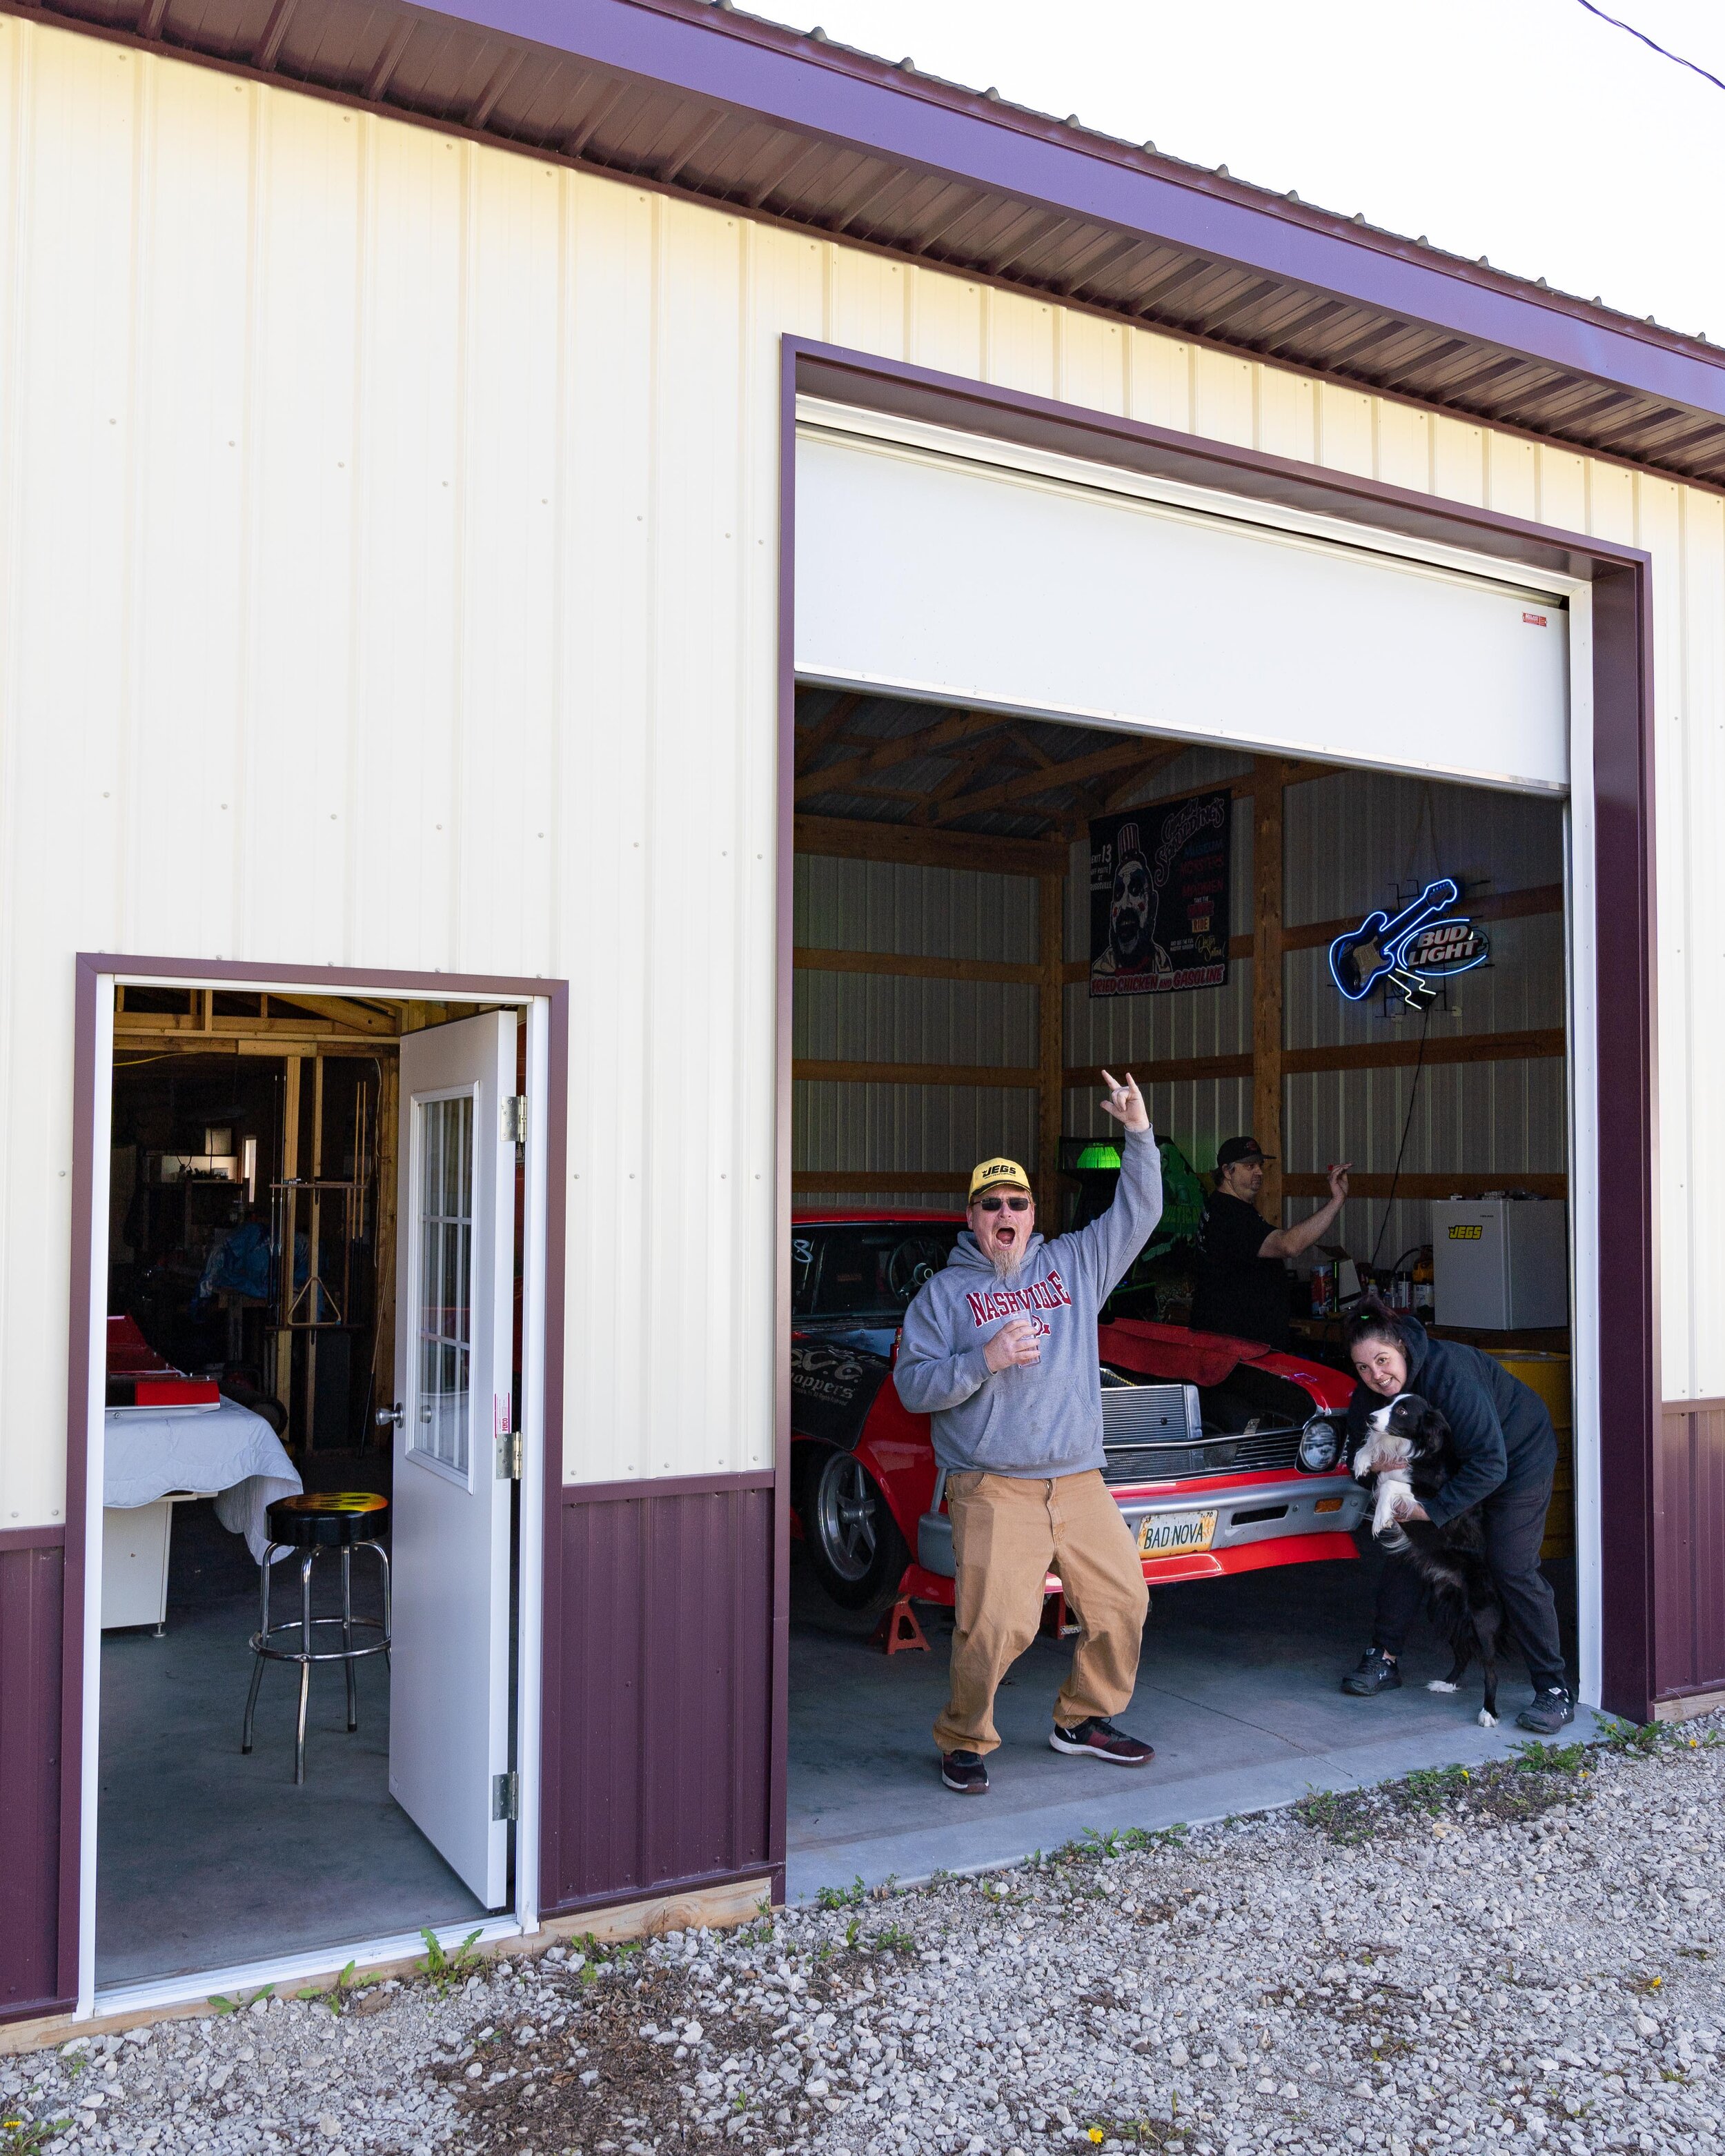  “He’s the best damn drag race car tuner in the Midwest, don’t let him fool you... but he’s sh*t at darts! You wanna drink buddy?” - Jamie (Jamie, Todd, Andi) | 04/13/20 (Mayetta, KS) 